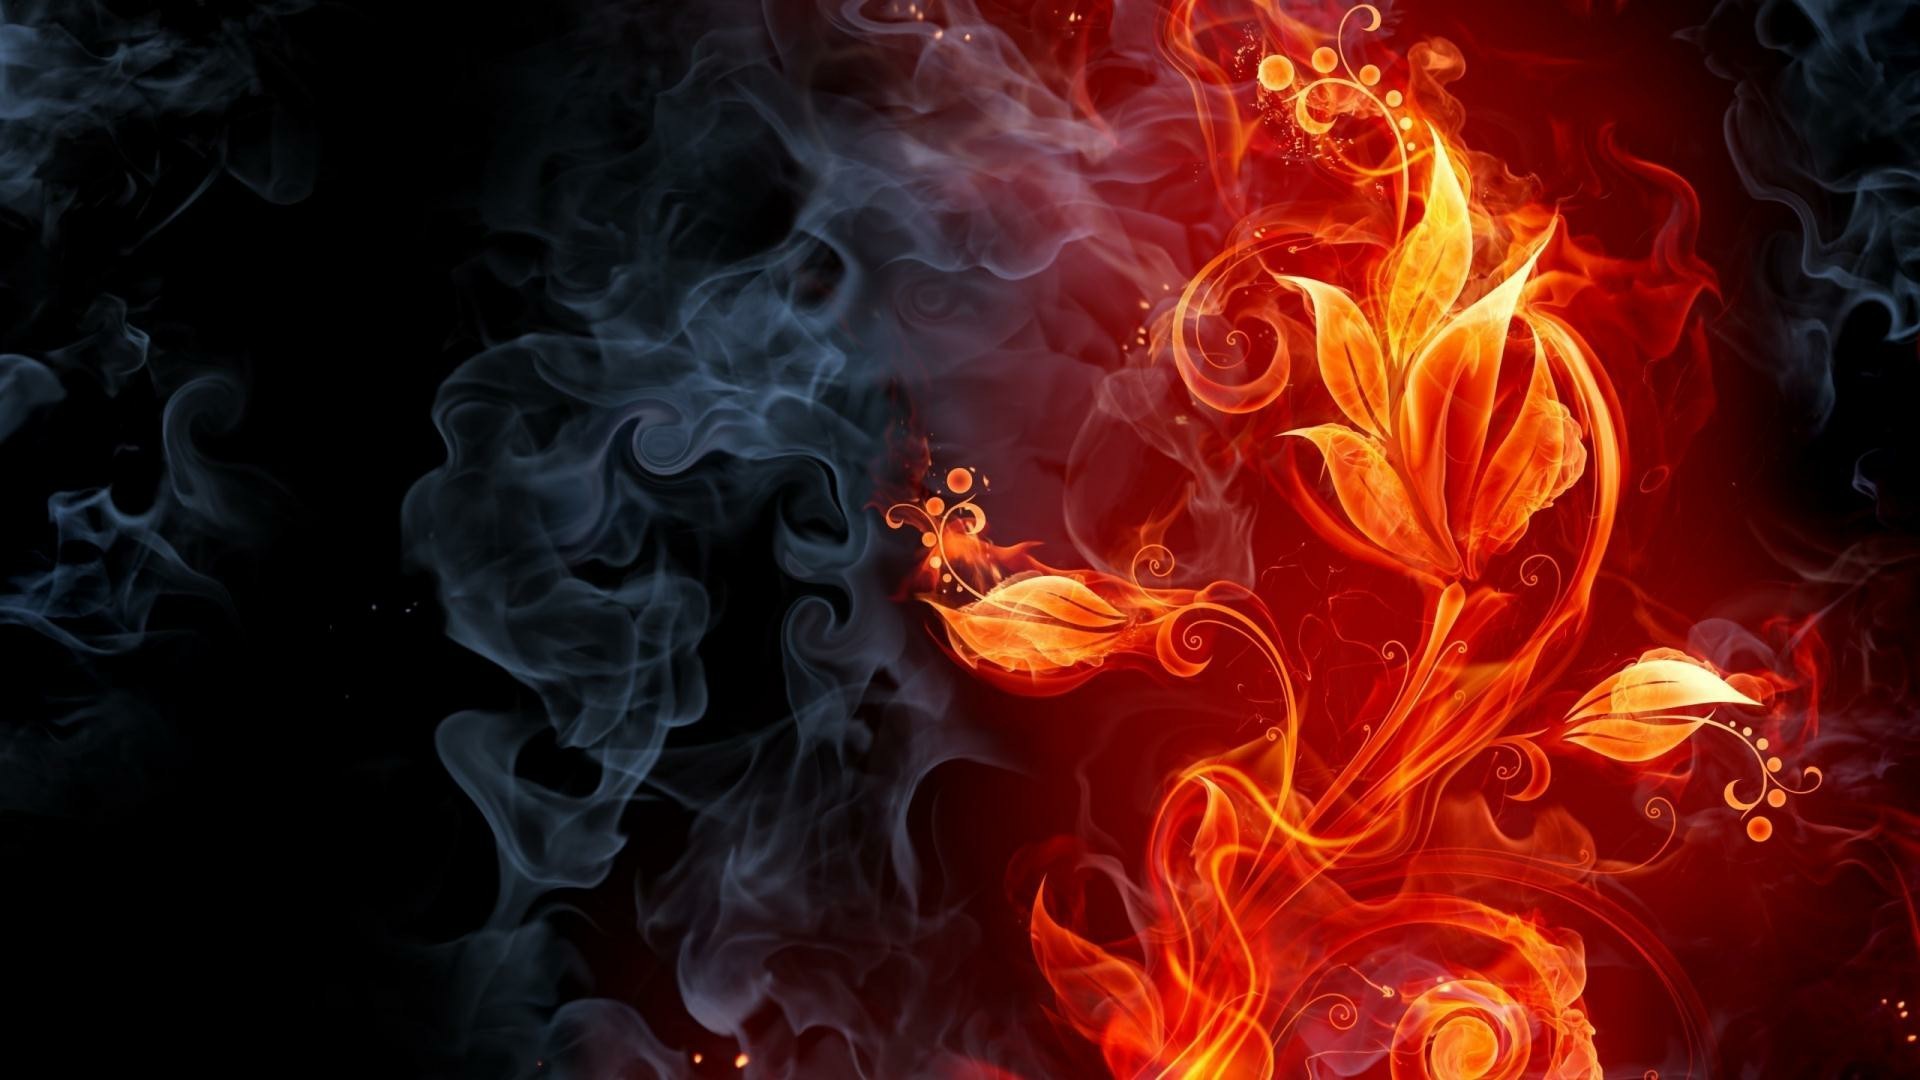 1920x1080  abstract fire book wallpaper hd apple colourful amazing cool  desktop wallpapers high definition 4k 1920Ã—1080 Wallpaper HD